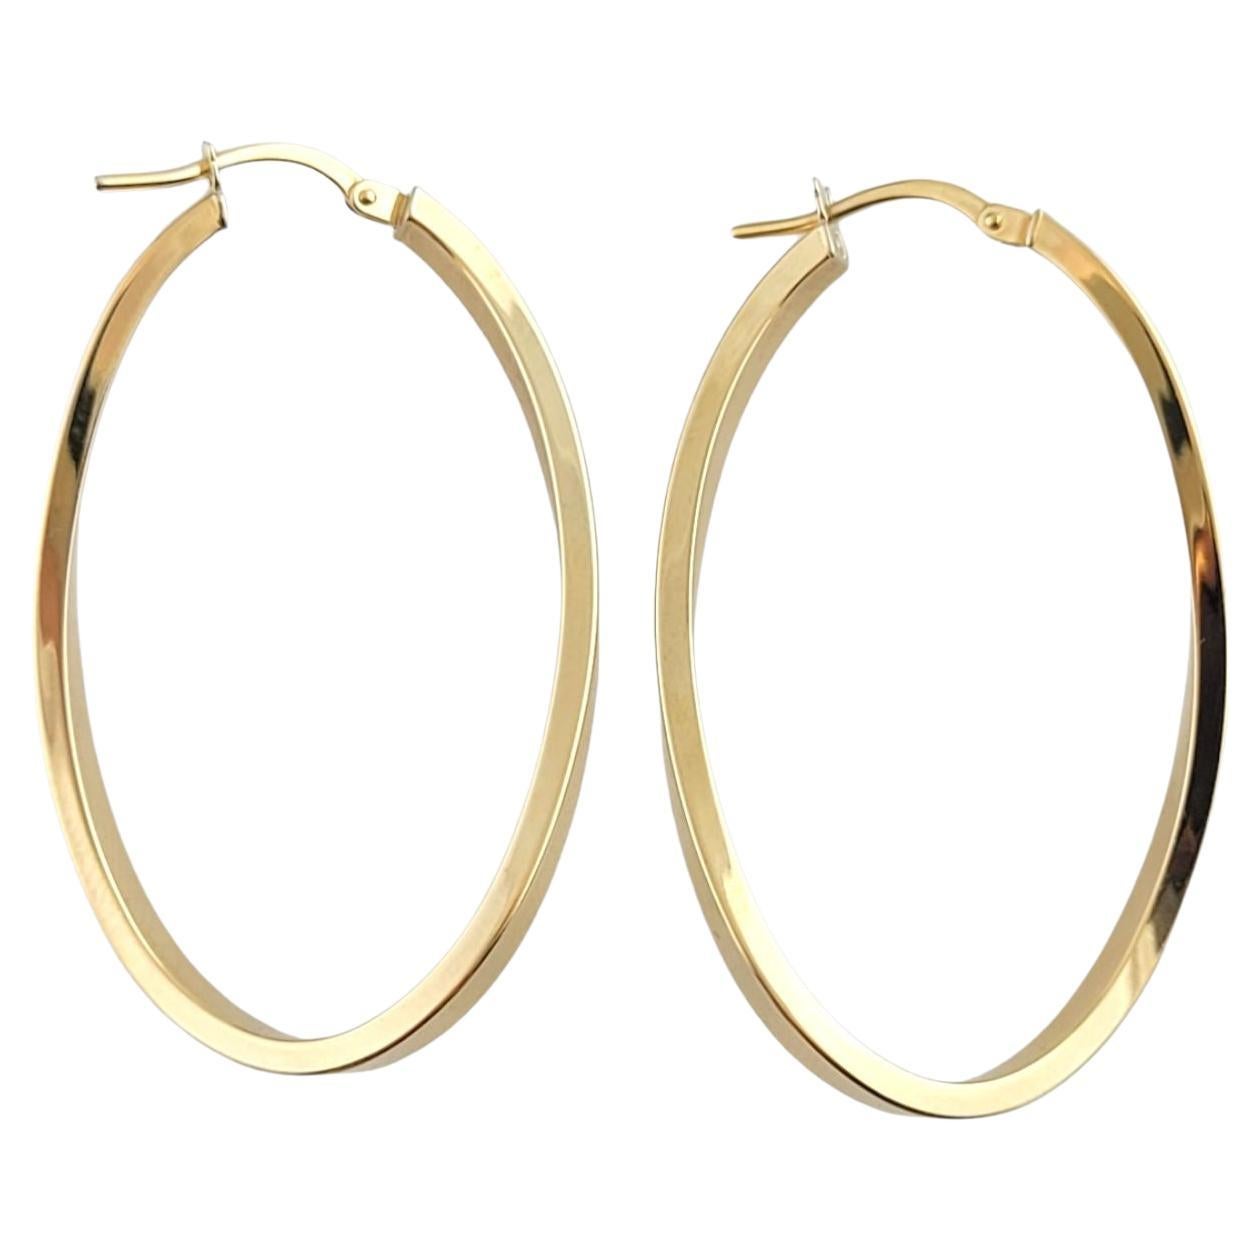  18K Yellow Gold Curved Oval Hoop Earrings #14795 For Sale